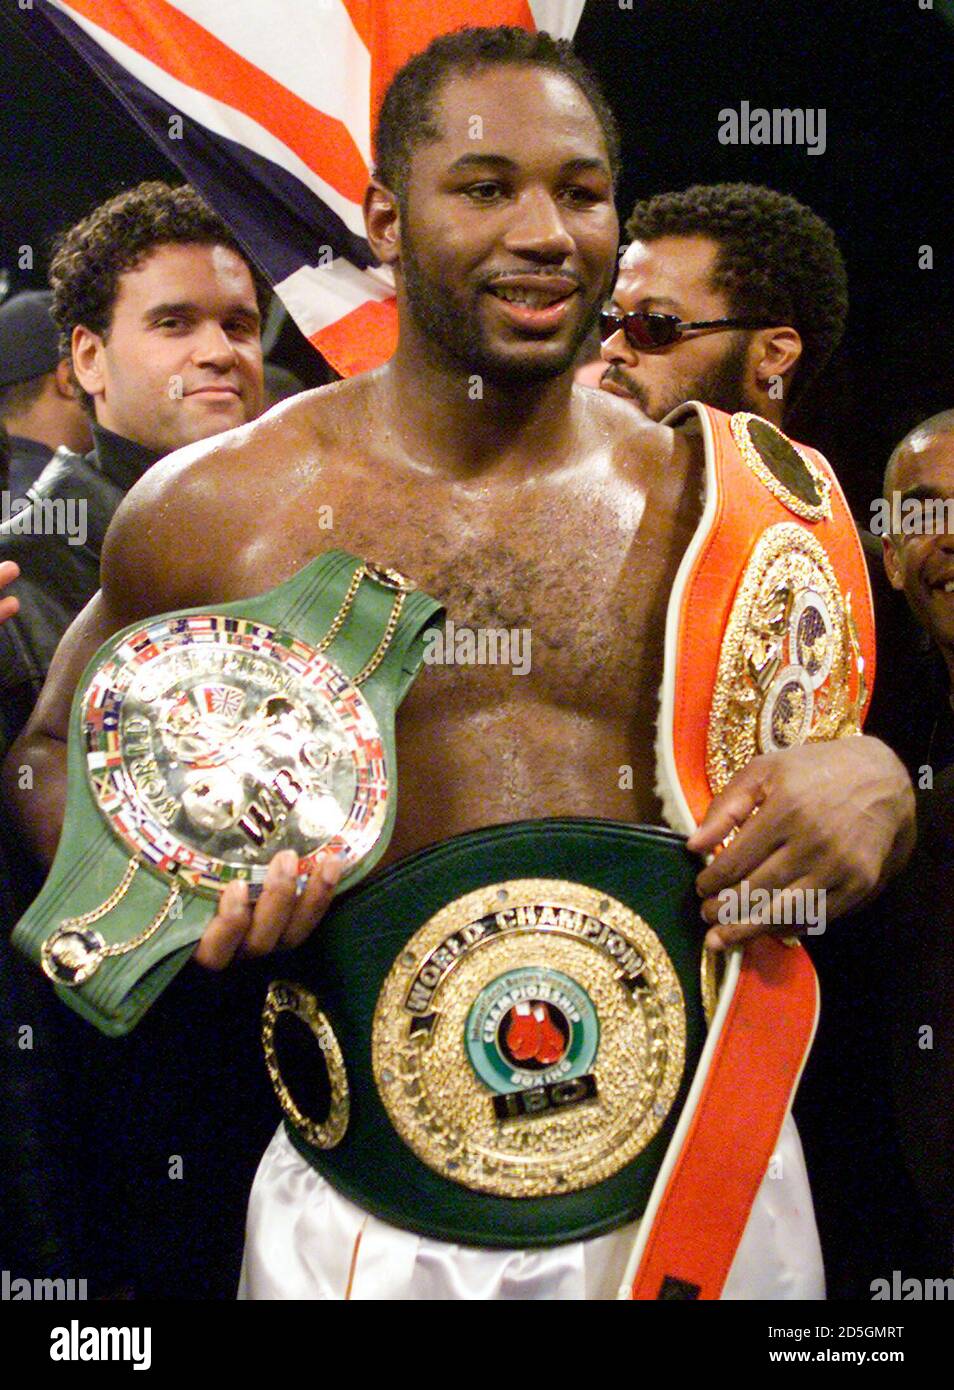 WBC and IBF champion Lennox Lewis of London, England, displays his belts after knocking out challenger Michael Grant of Norristown, Pennsylvania, in the second round of their at Madison Square